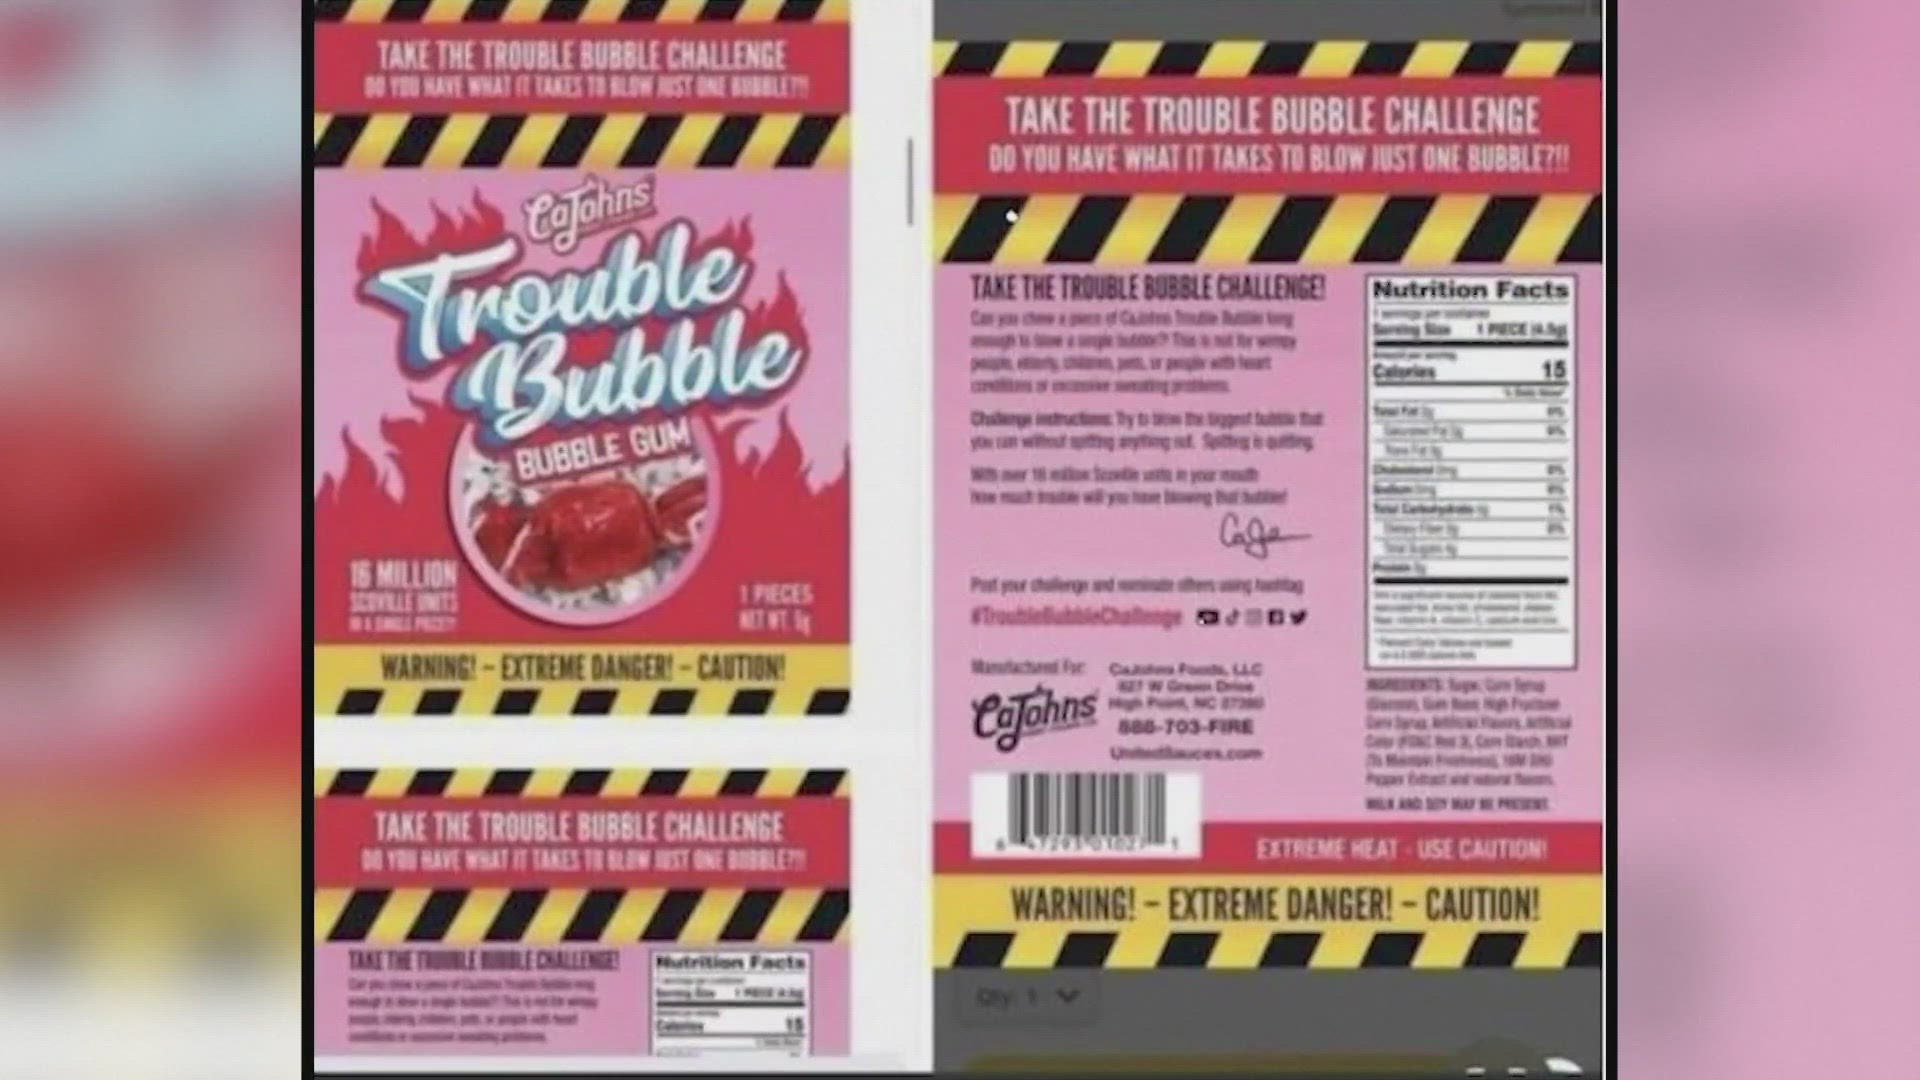 Trouble Bubble Gum contains the same active ingredient as police pepper spray.